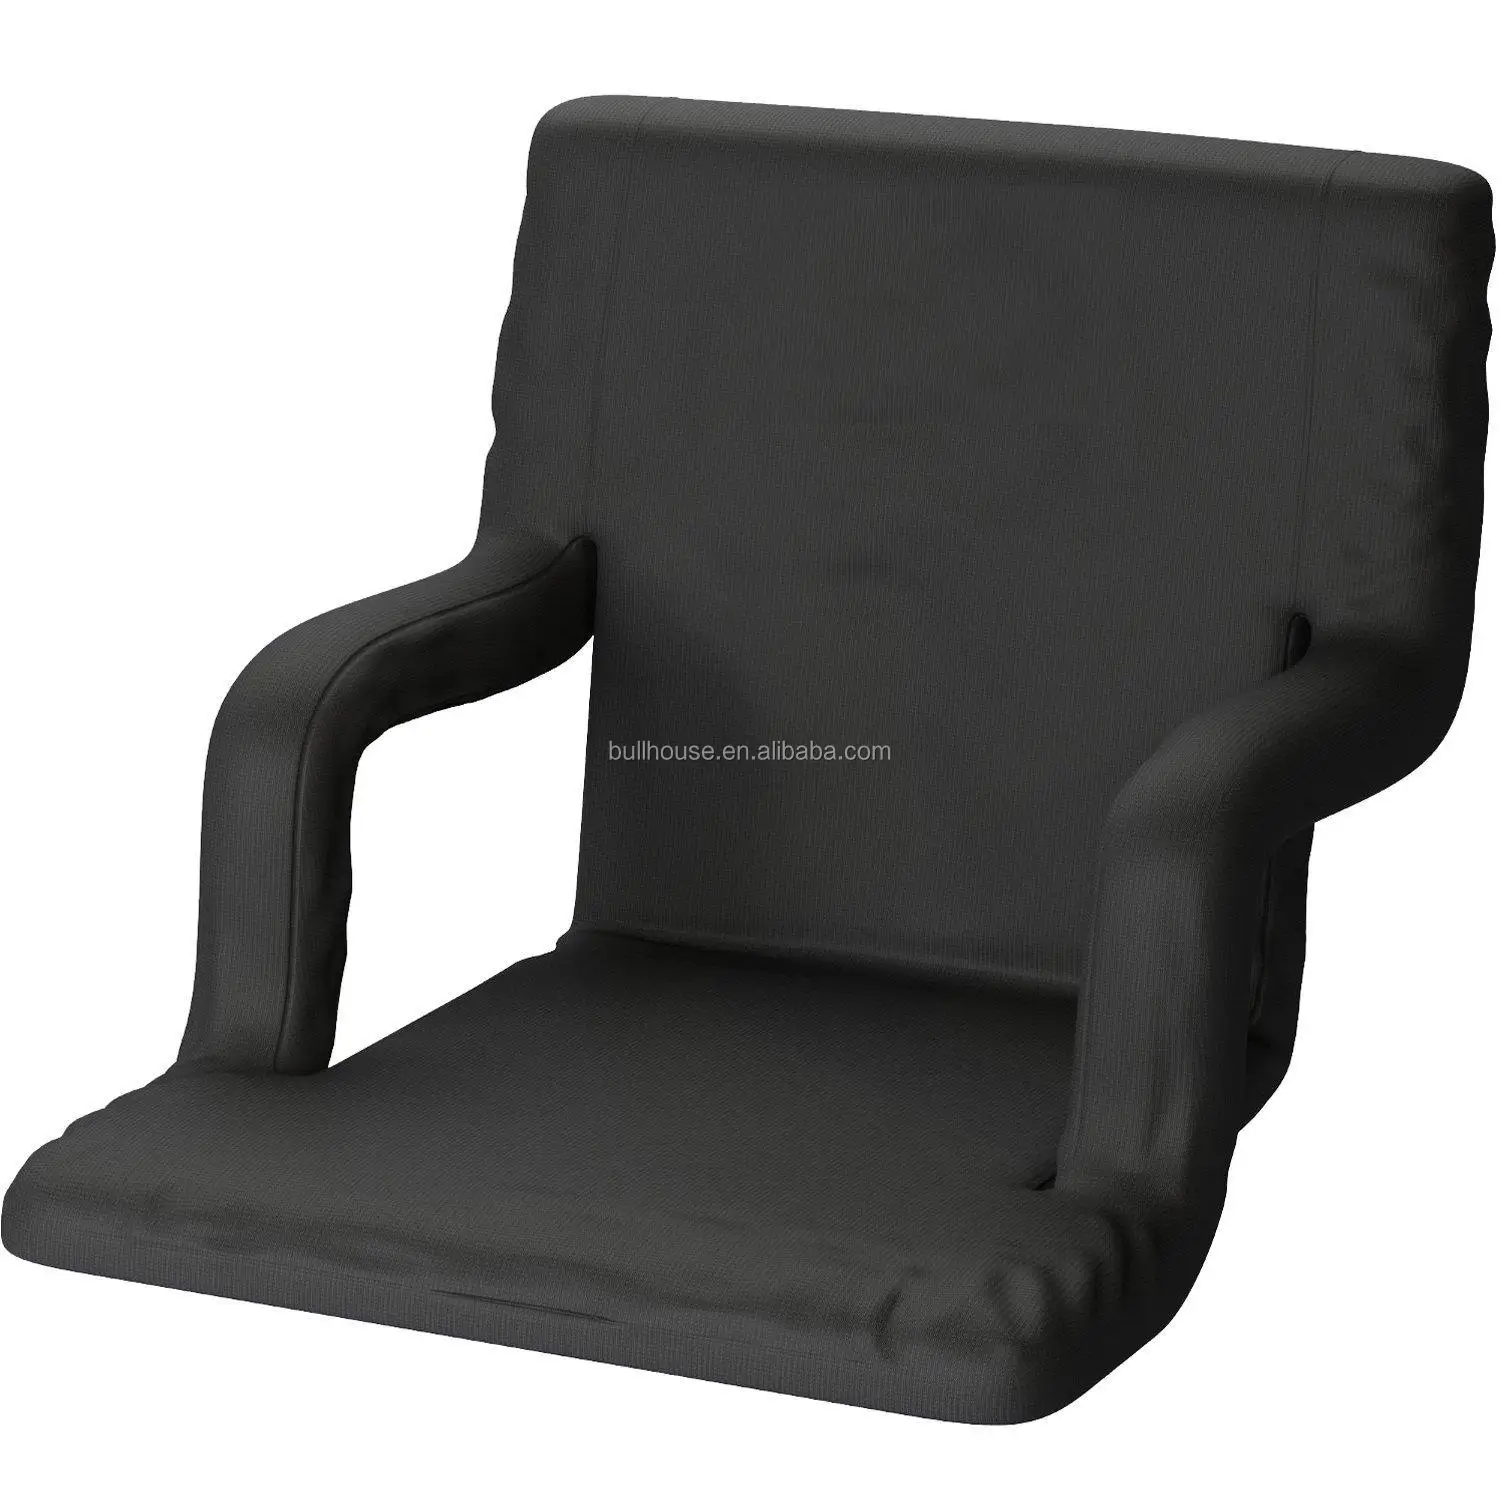 Reclining Seat for Bleachers with Padded Cushion Shoulder Straps Black Sportneer Portable Stadium Seat Chair 